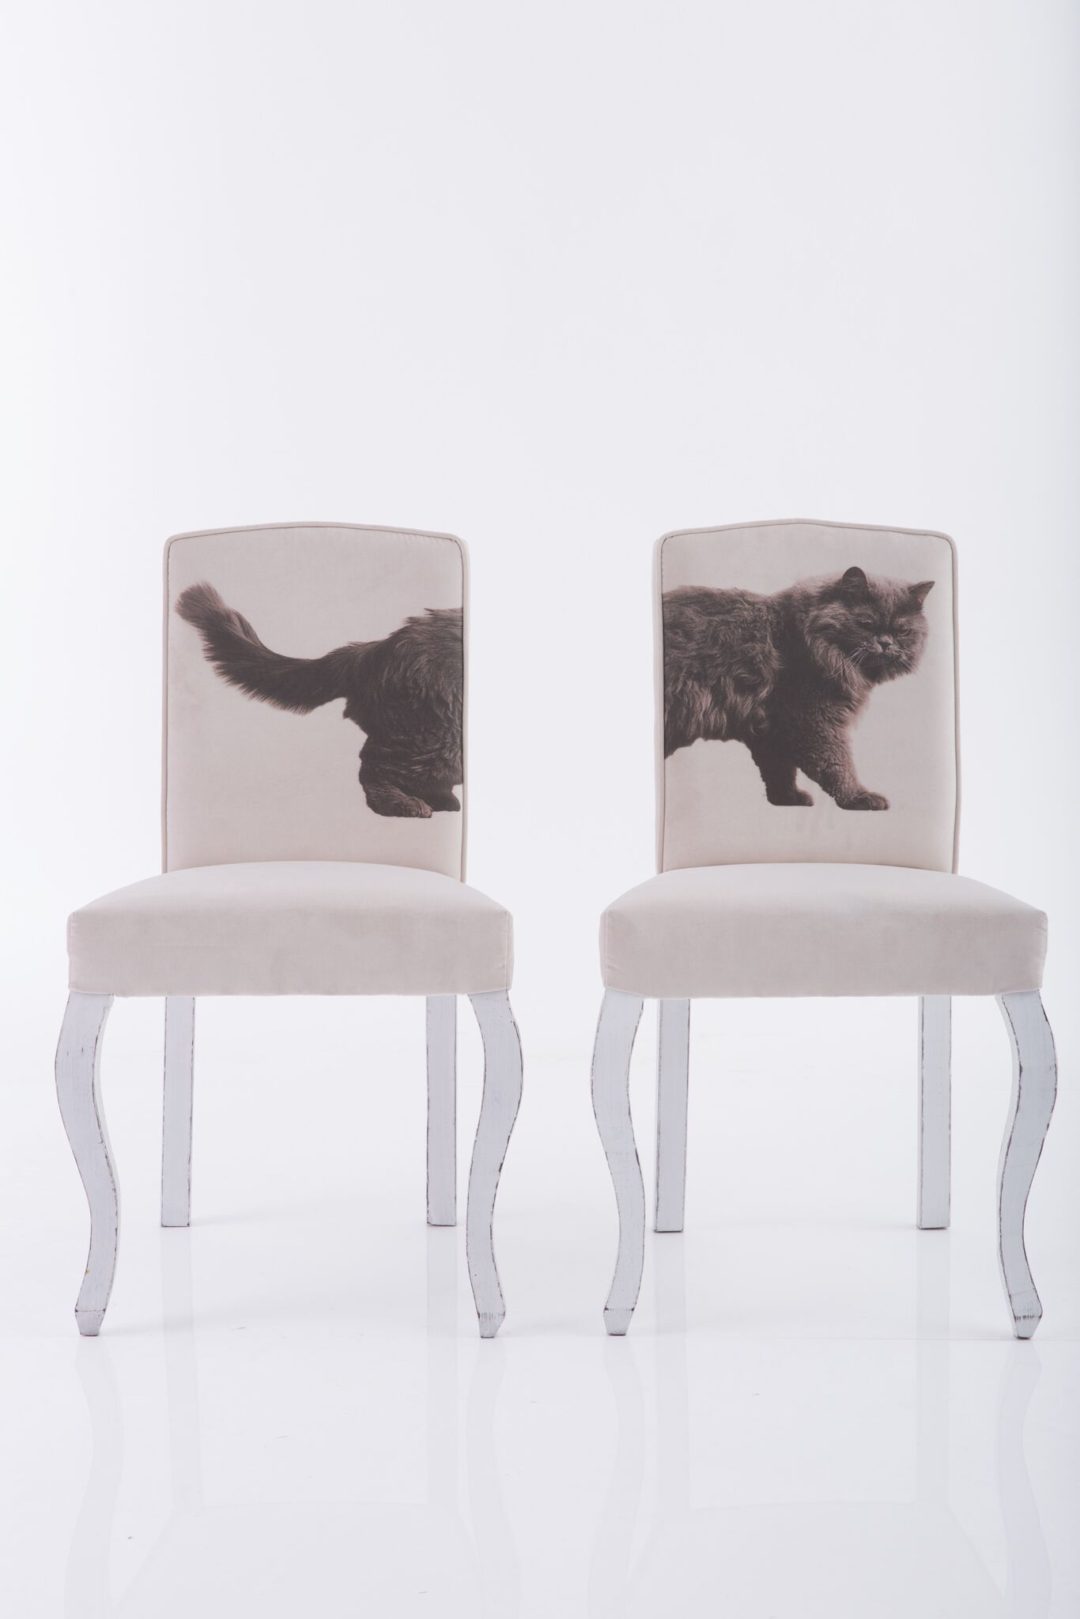 The cat diptych chairs I fell so madly in love with!